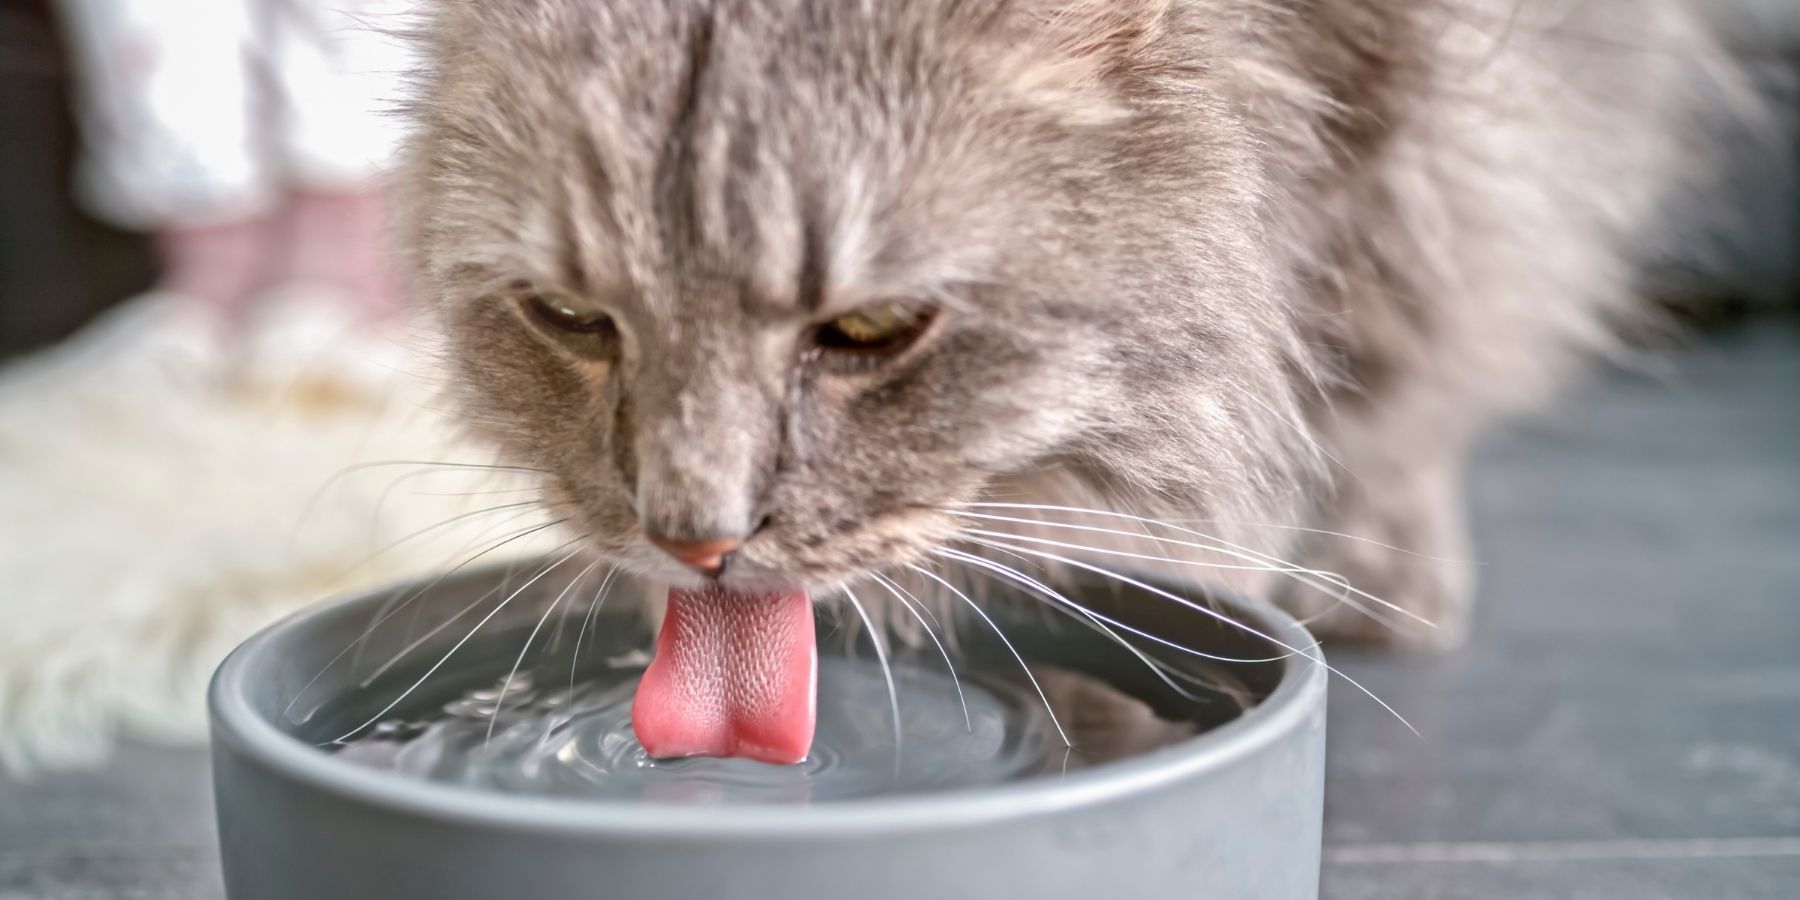 Cat Not Drinking: How To Prevent Dehydration